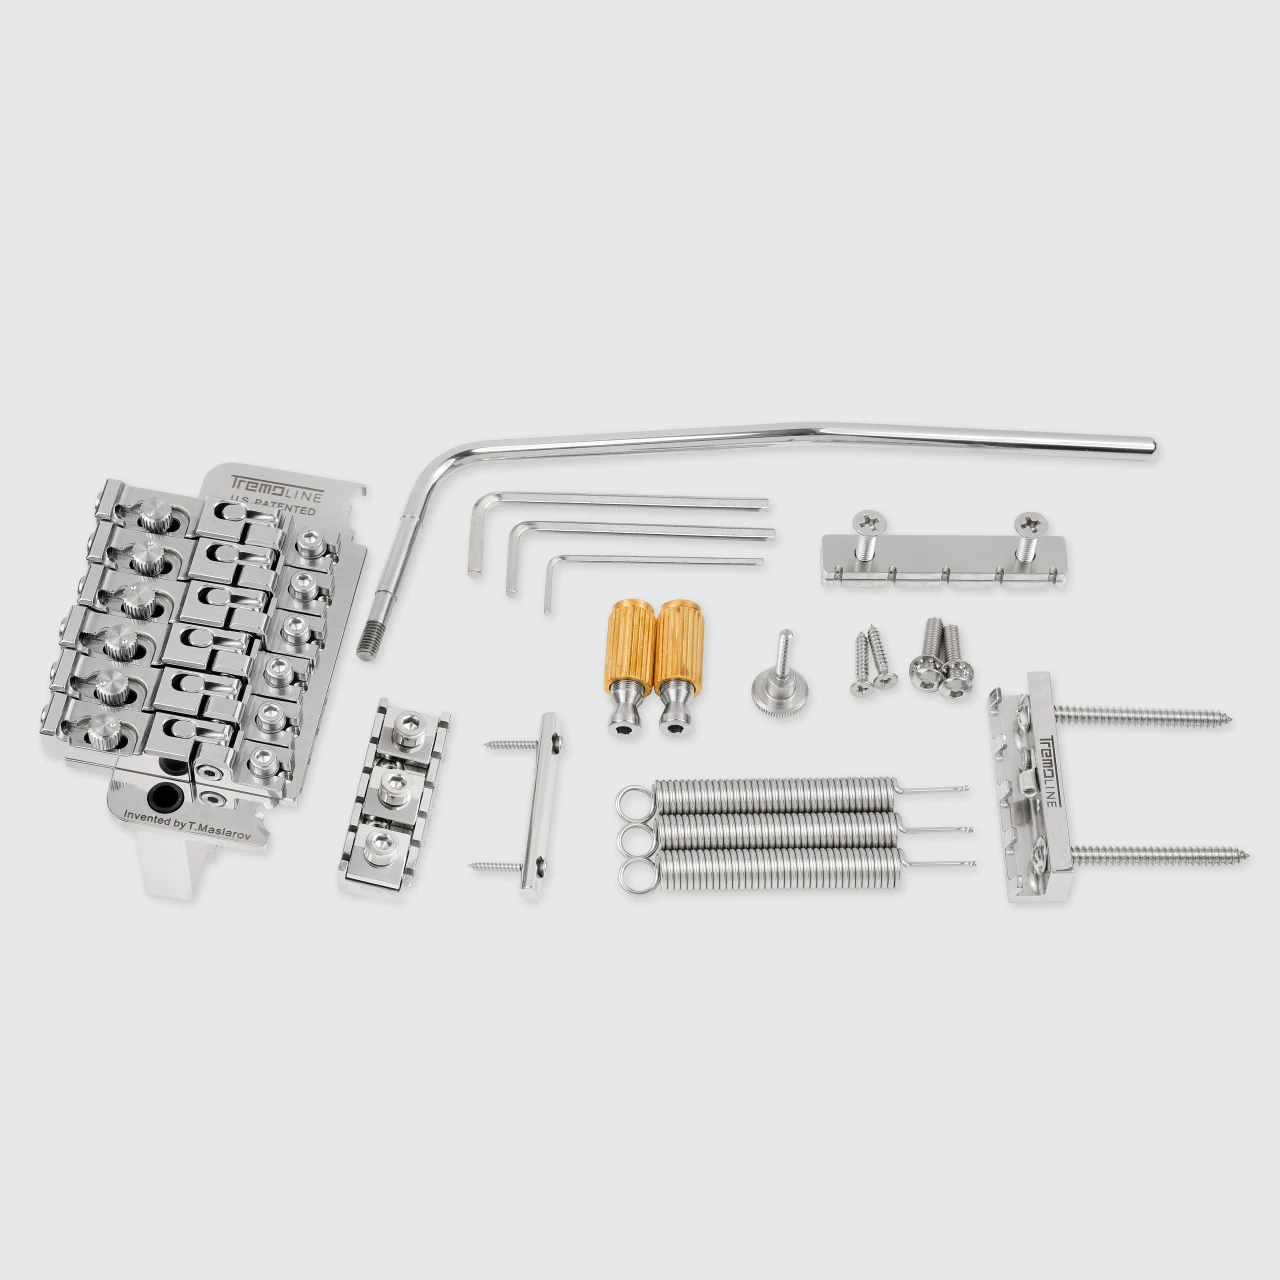 <img src=”Tremoline-Tremolo-system-flat-top-FT36T-R3-SP_3” width="1280" height="1280" alt=”All parts of the Tremoline FT36T double locking tremolo set” />